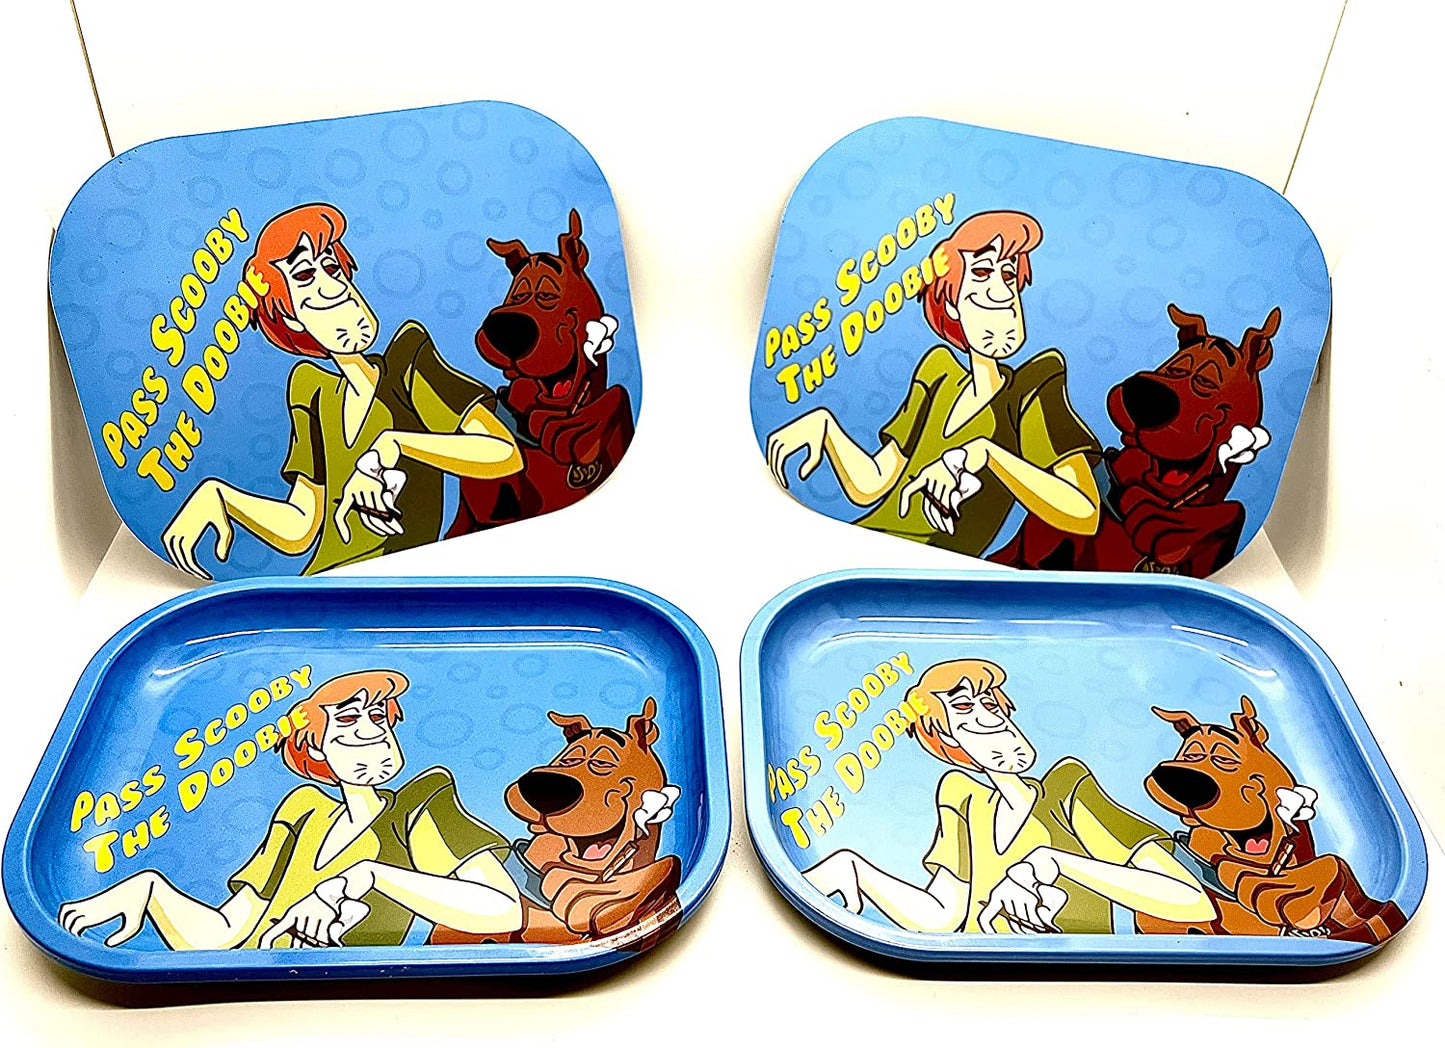 Legendary Comedy Container 7" x 5" Contains 1 Premium Metal Rolling Tray with Magnetic Lid Set Perfect Backpack Size for On The Go and Discrete.